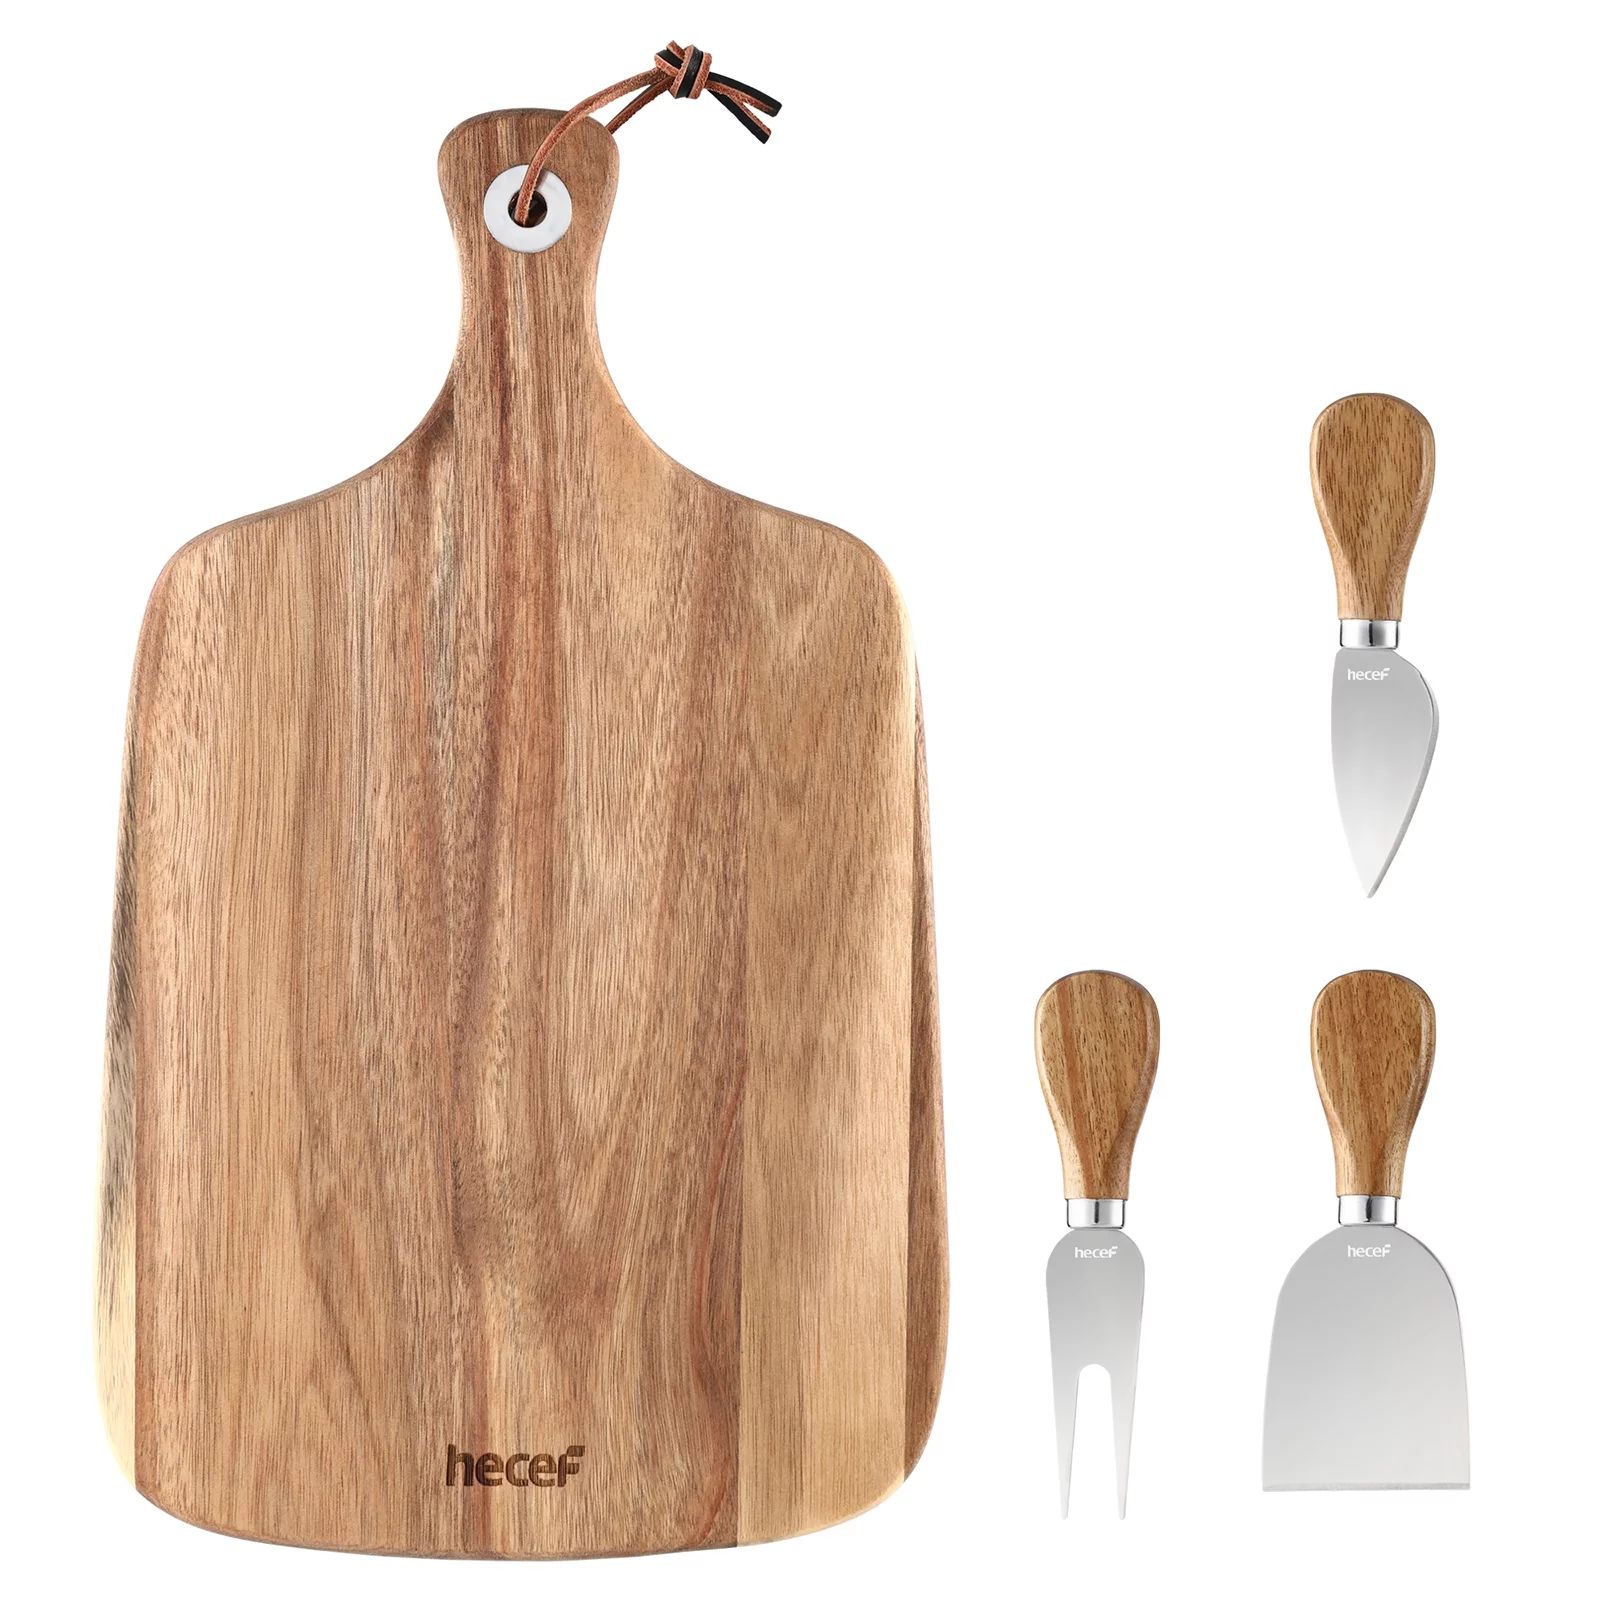 Hecef Upgrade Larger Cheese Board Set of 4, Acacia Wood Charcuterie Serving Plate with Knife Set | Walmart (US)